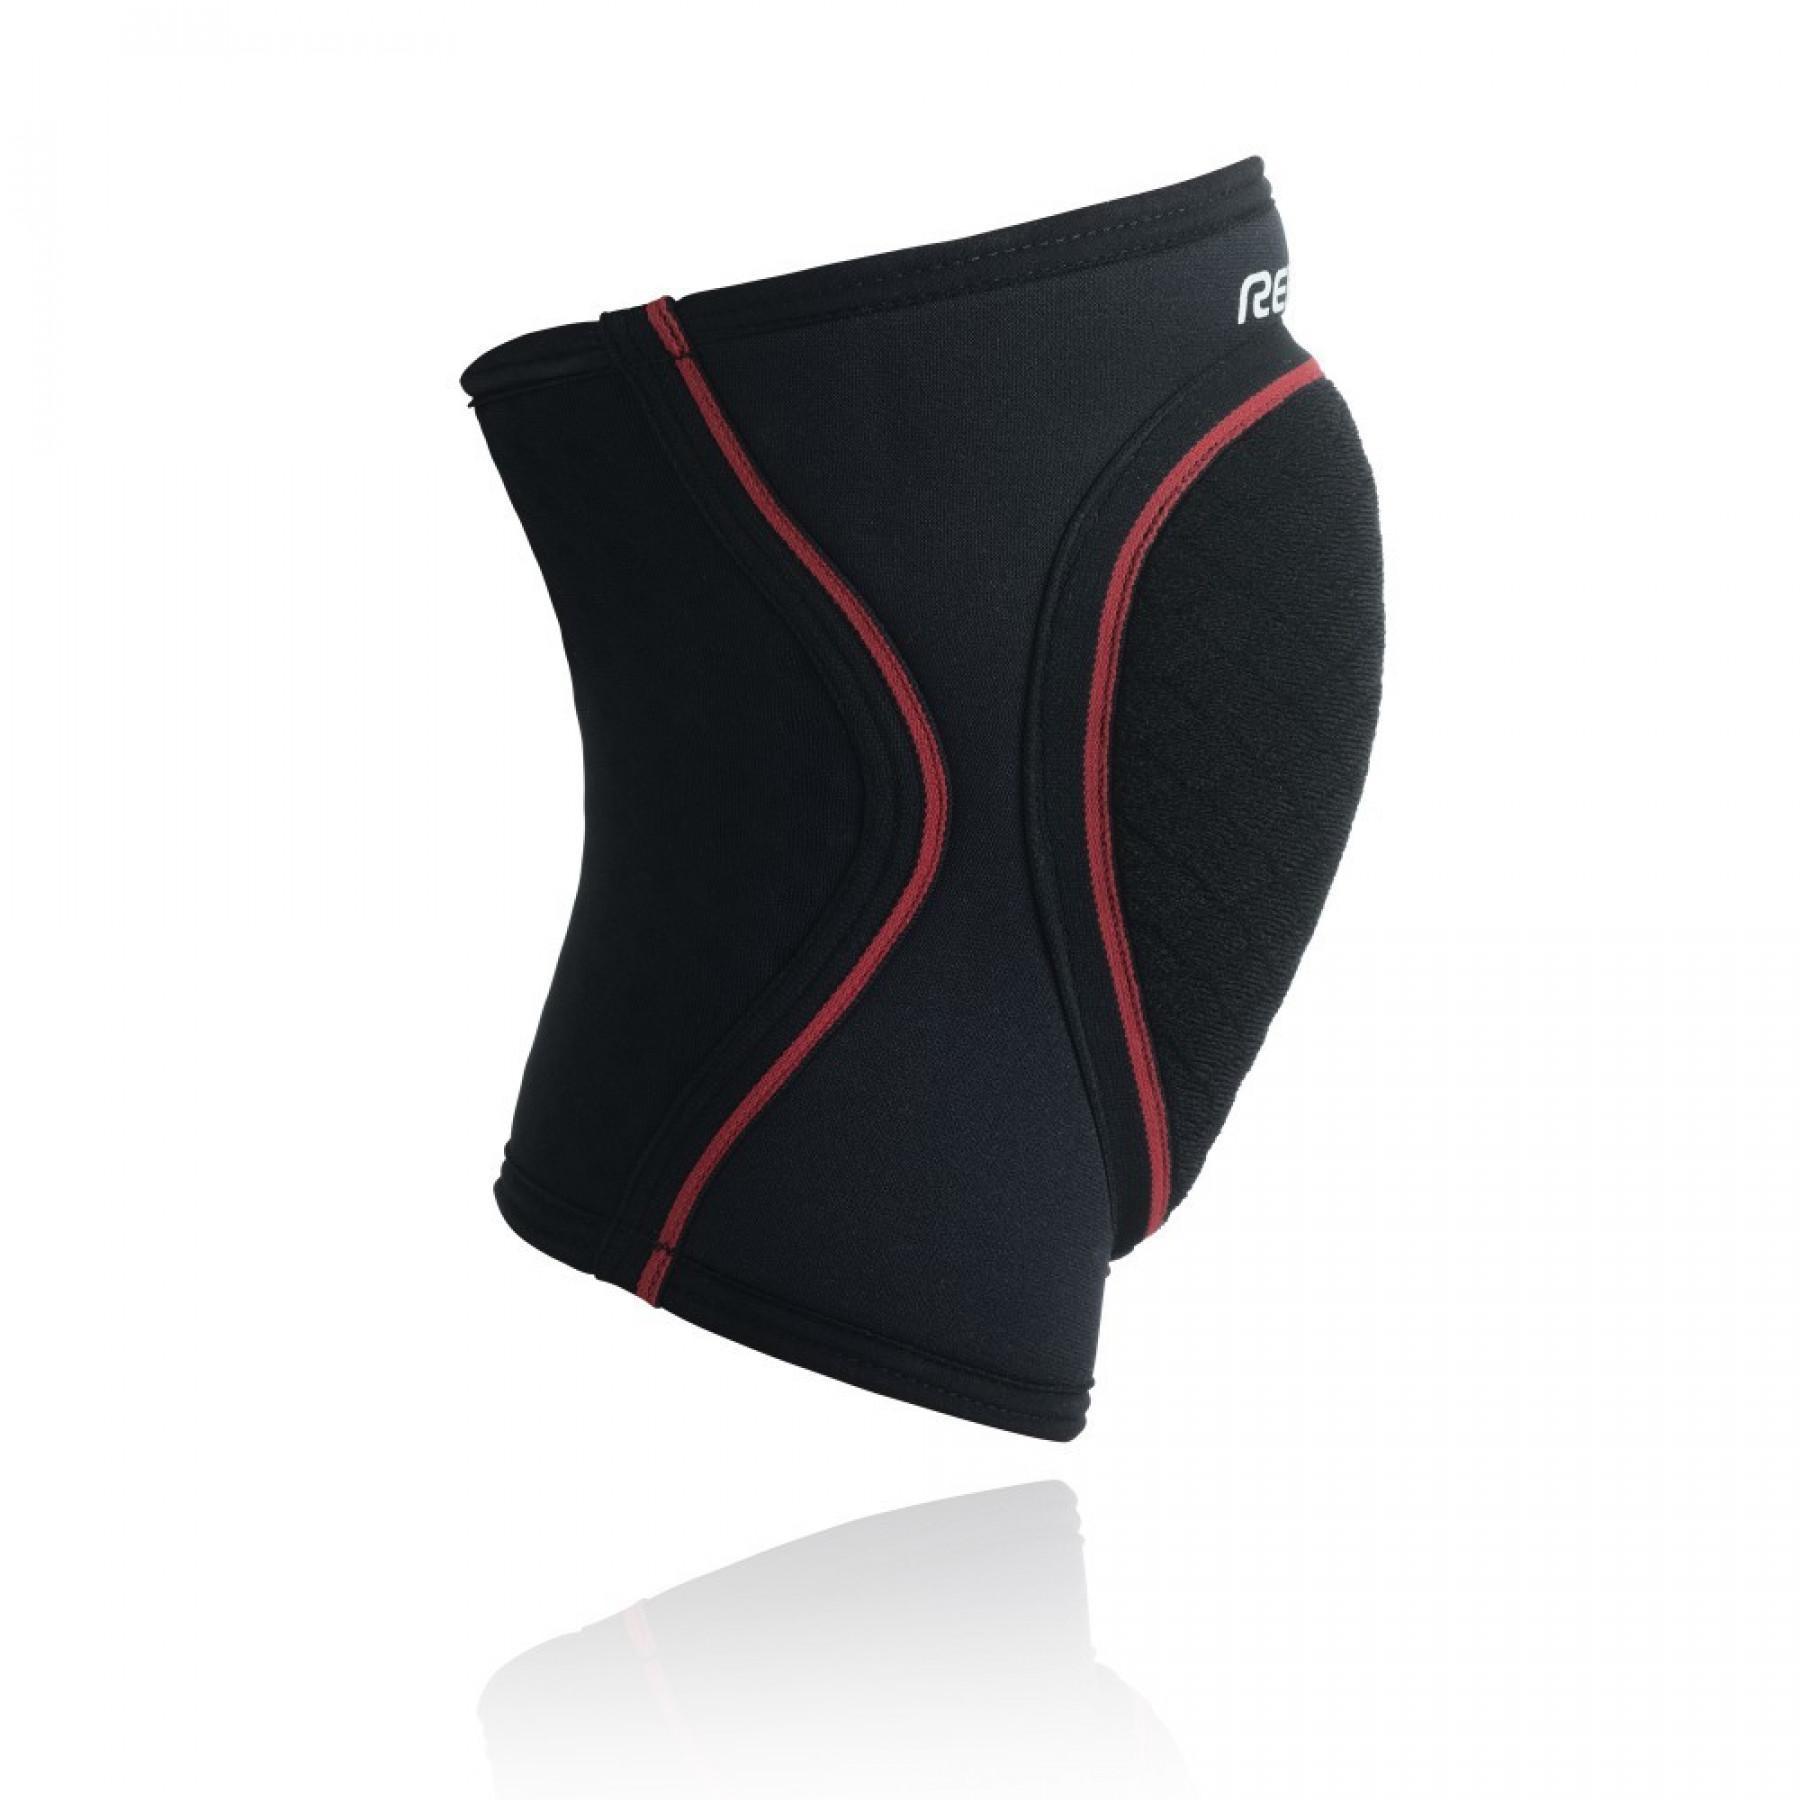 Protection Genoux Rehband Rx Speed Knee